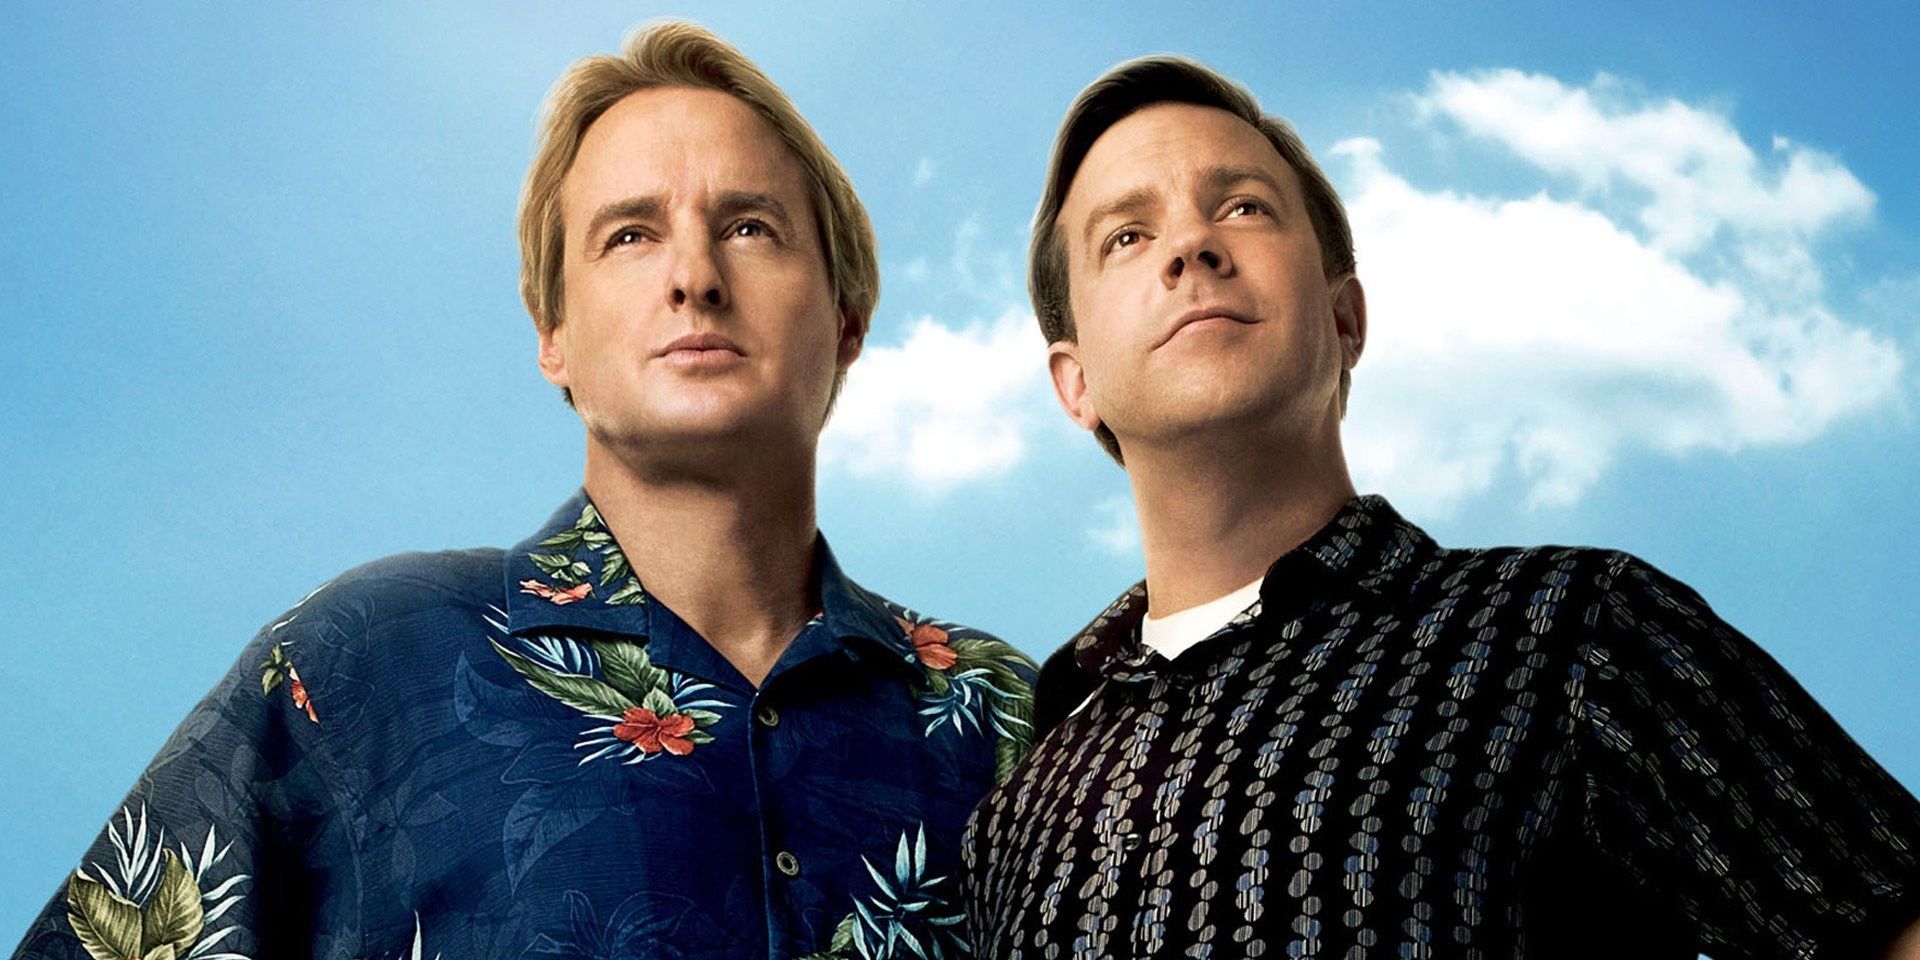 Owen Wilson and Jason Sudeikis on the poster for Hall Pass